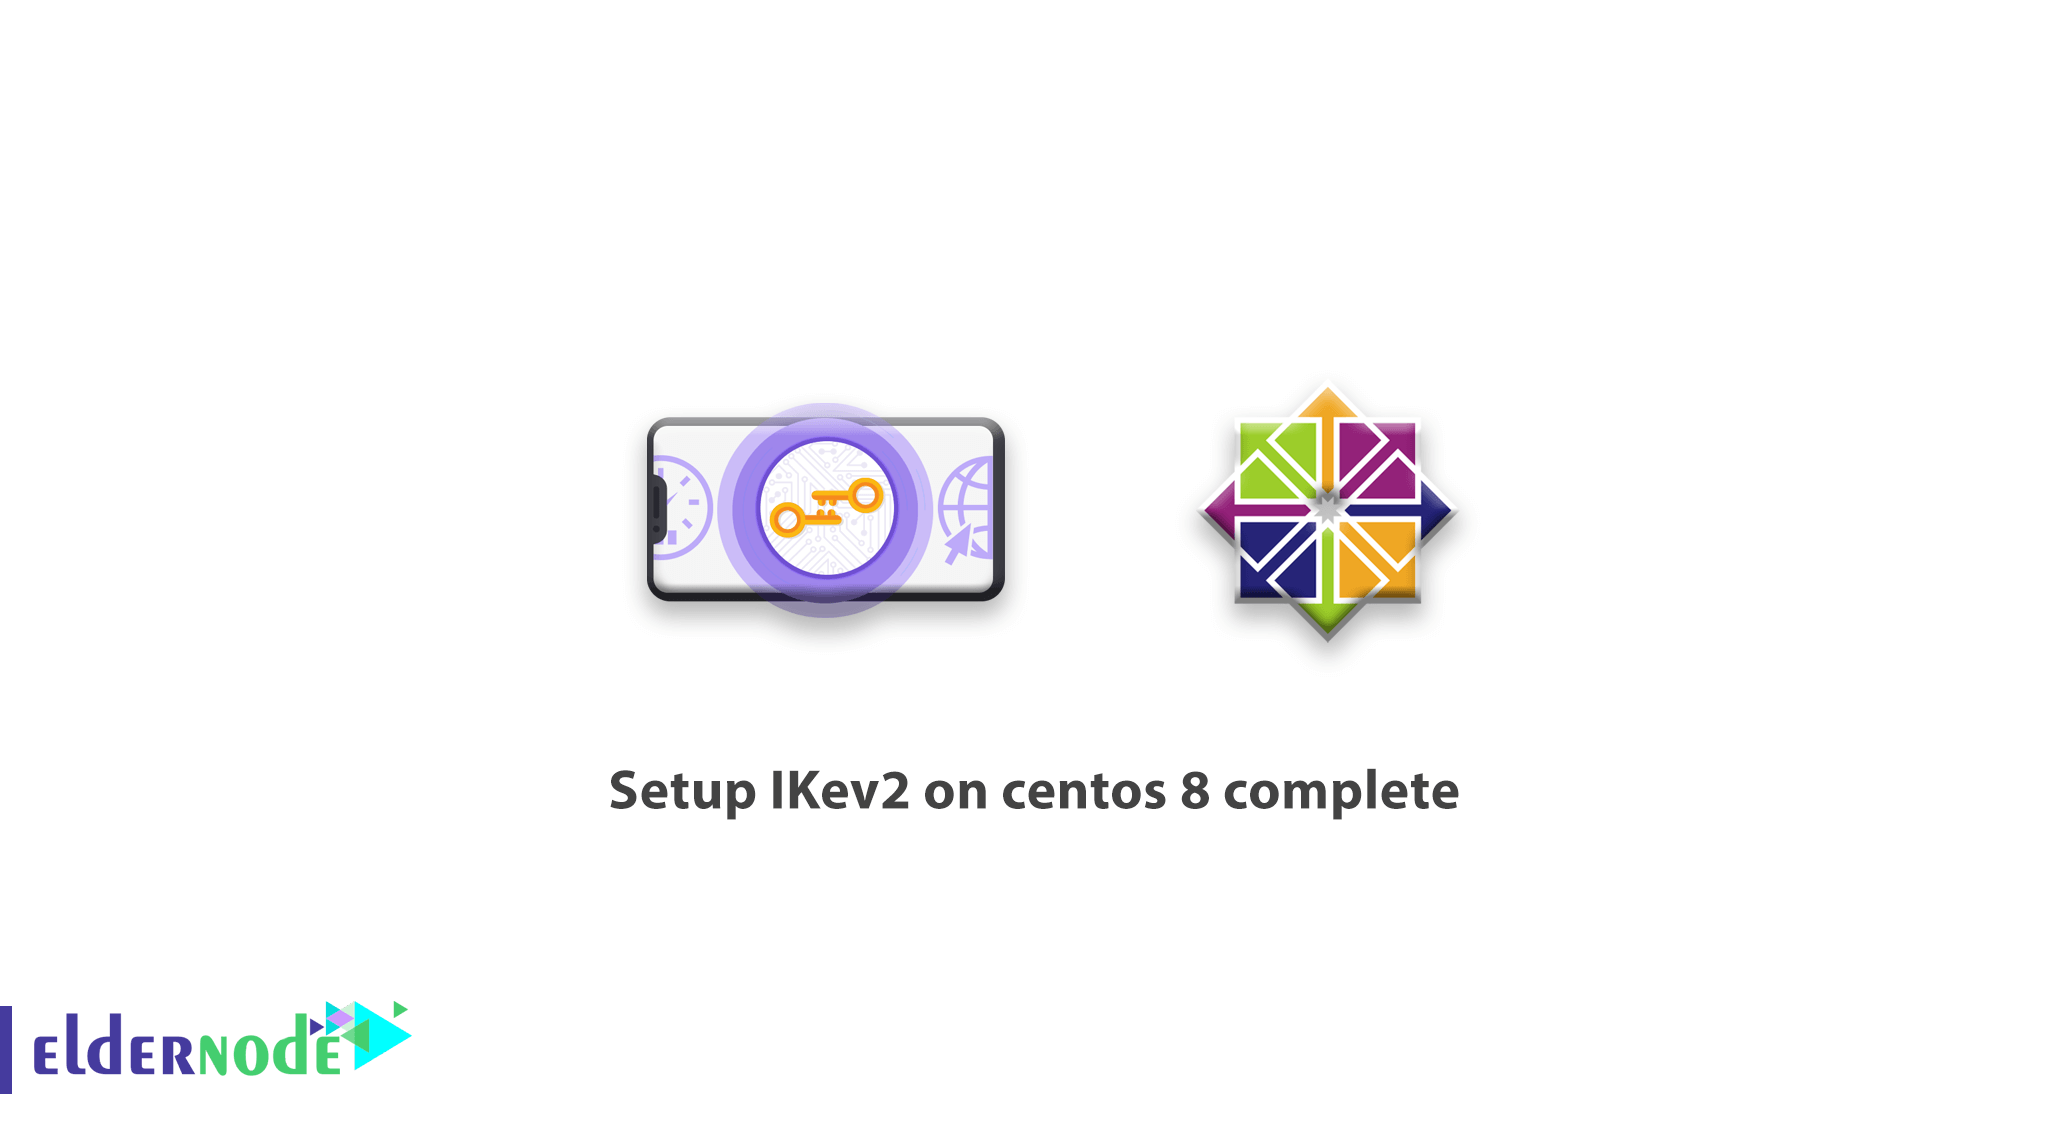 How to setup IKev2 on centos 8 complete